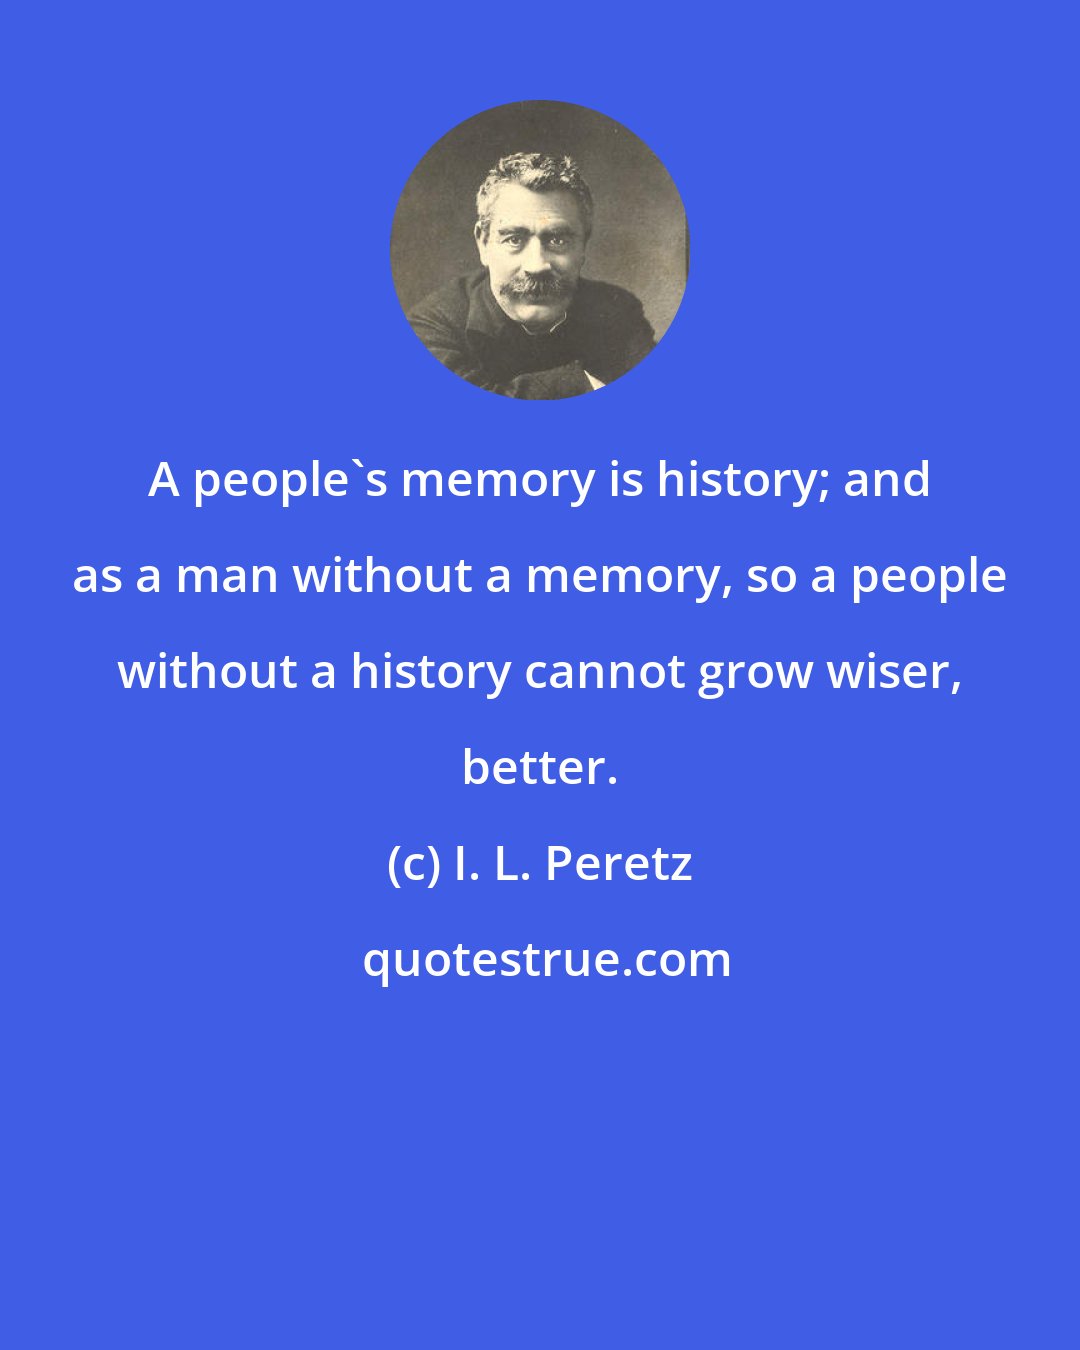 I. L. Peretz: A people's memory is history; and as a man without a memory, so a people without a history cannot grow wiser, better.